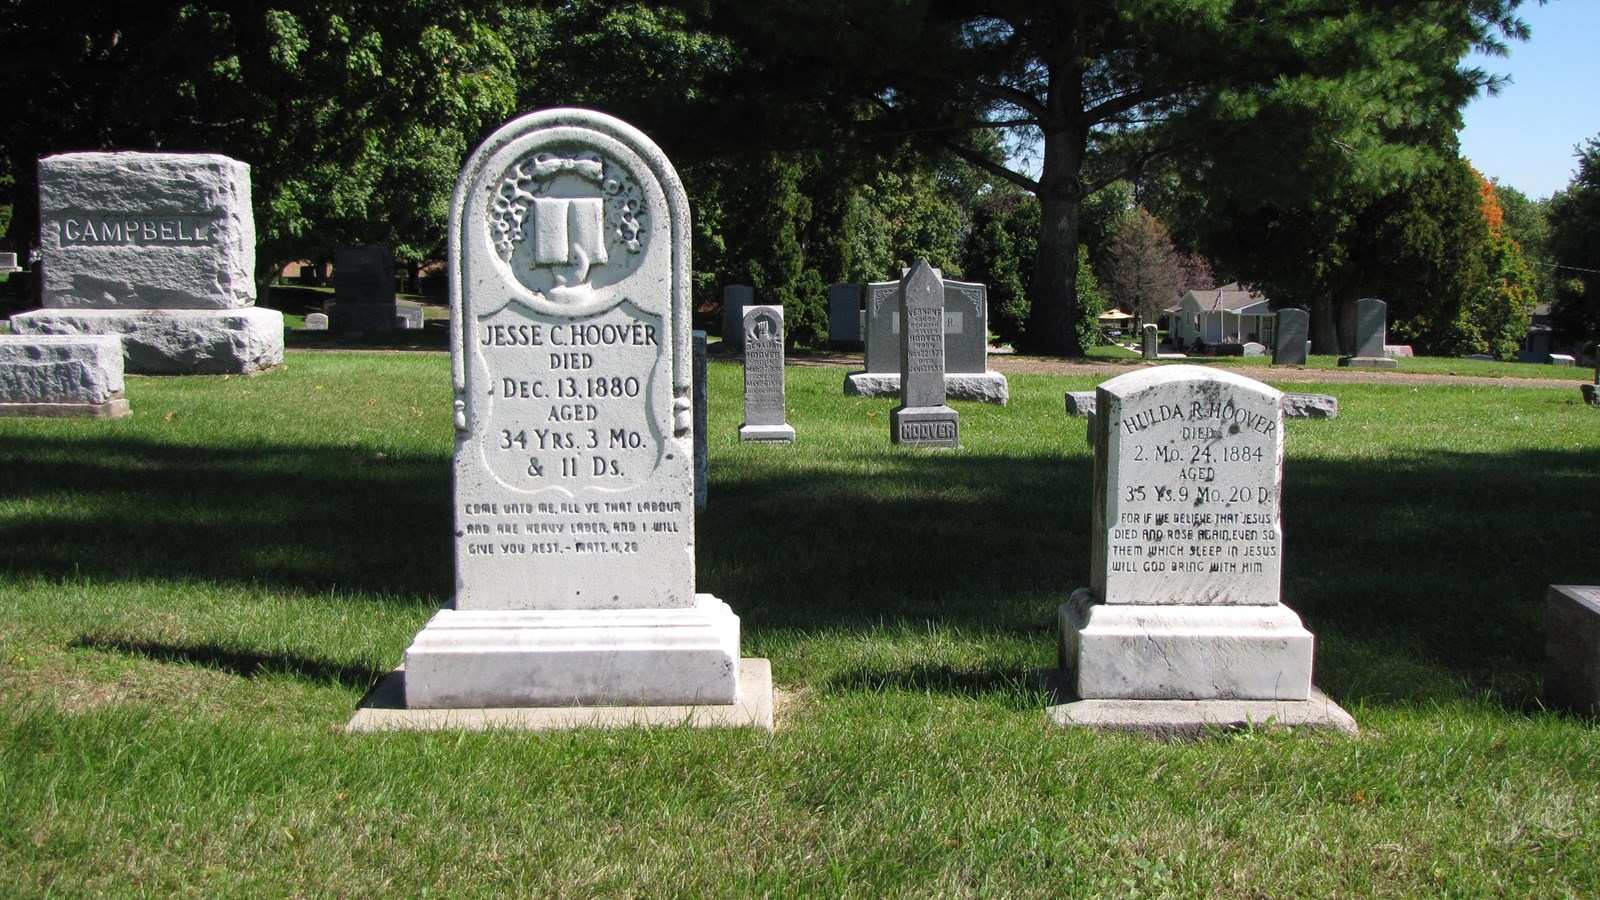 Two white headstones mark the graves of Jesse and Hulda Hoover.